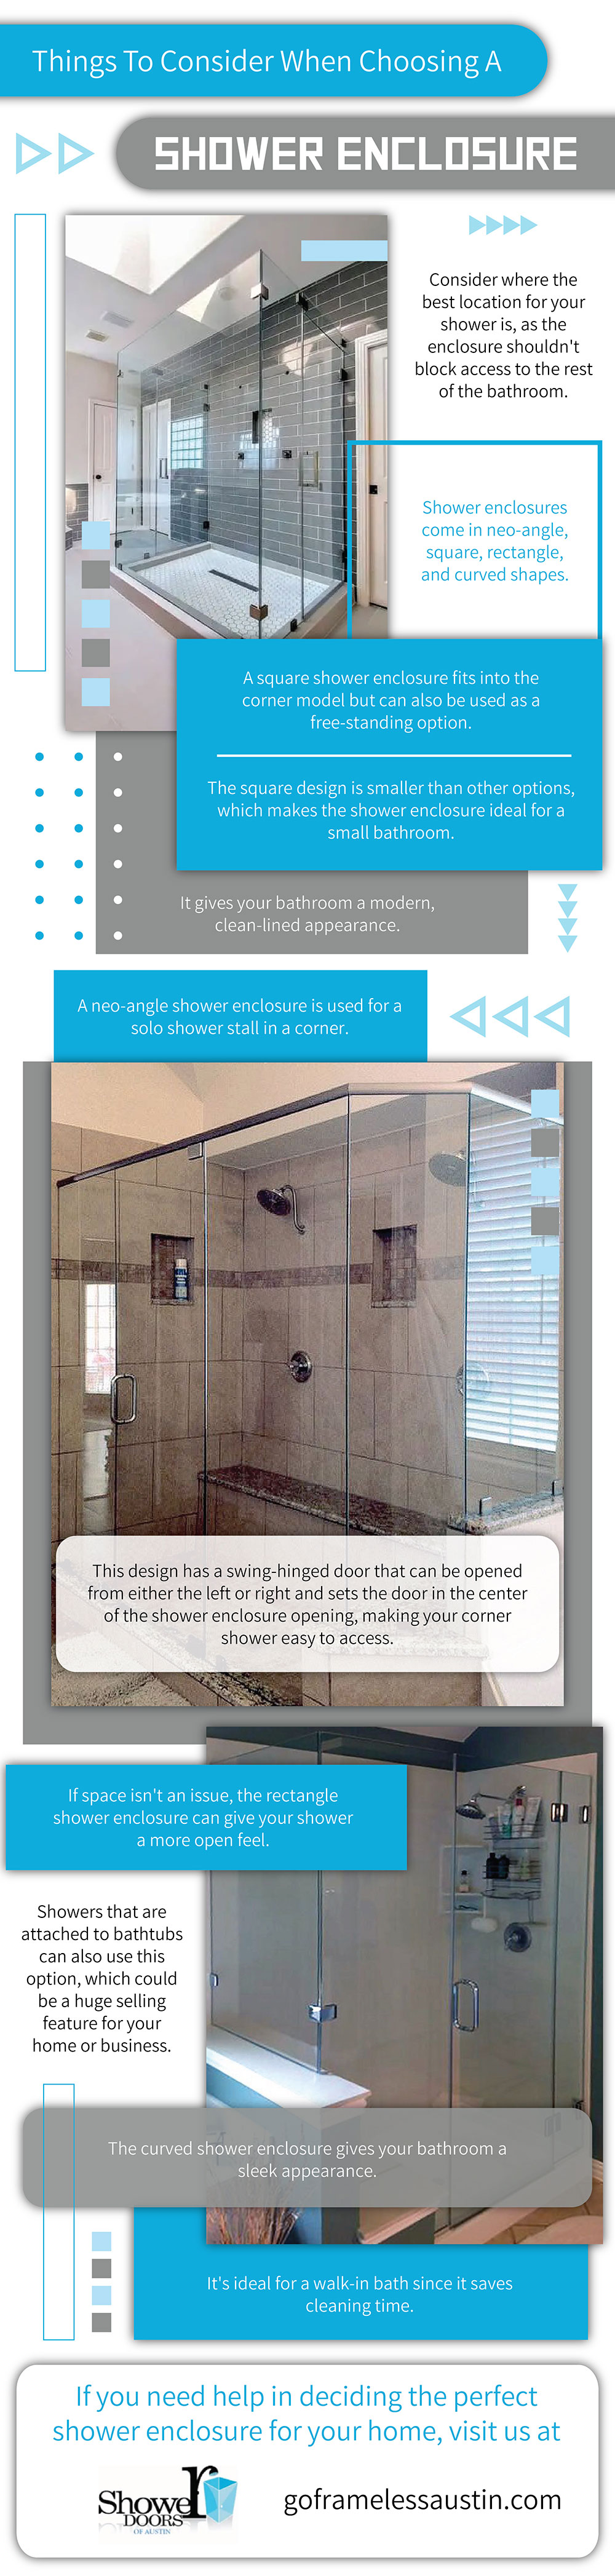 Things to Consider when choosing a shower enclosure